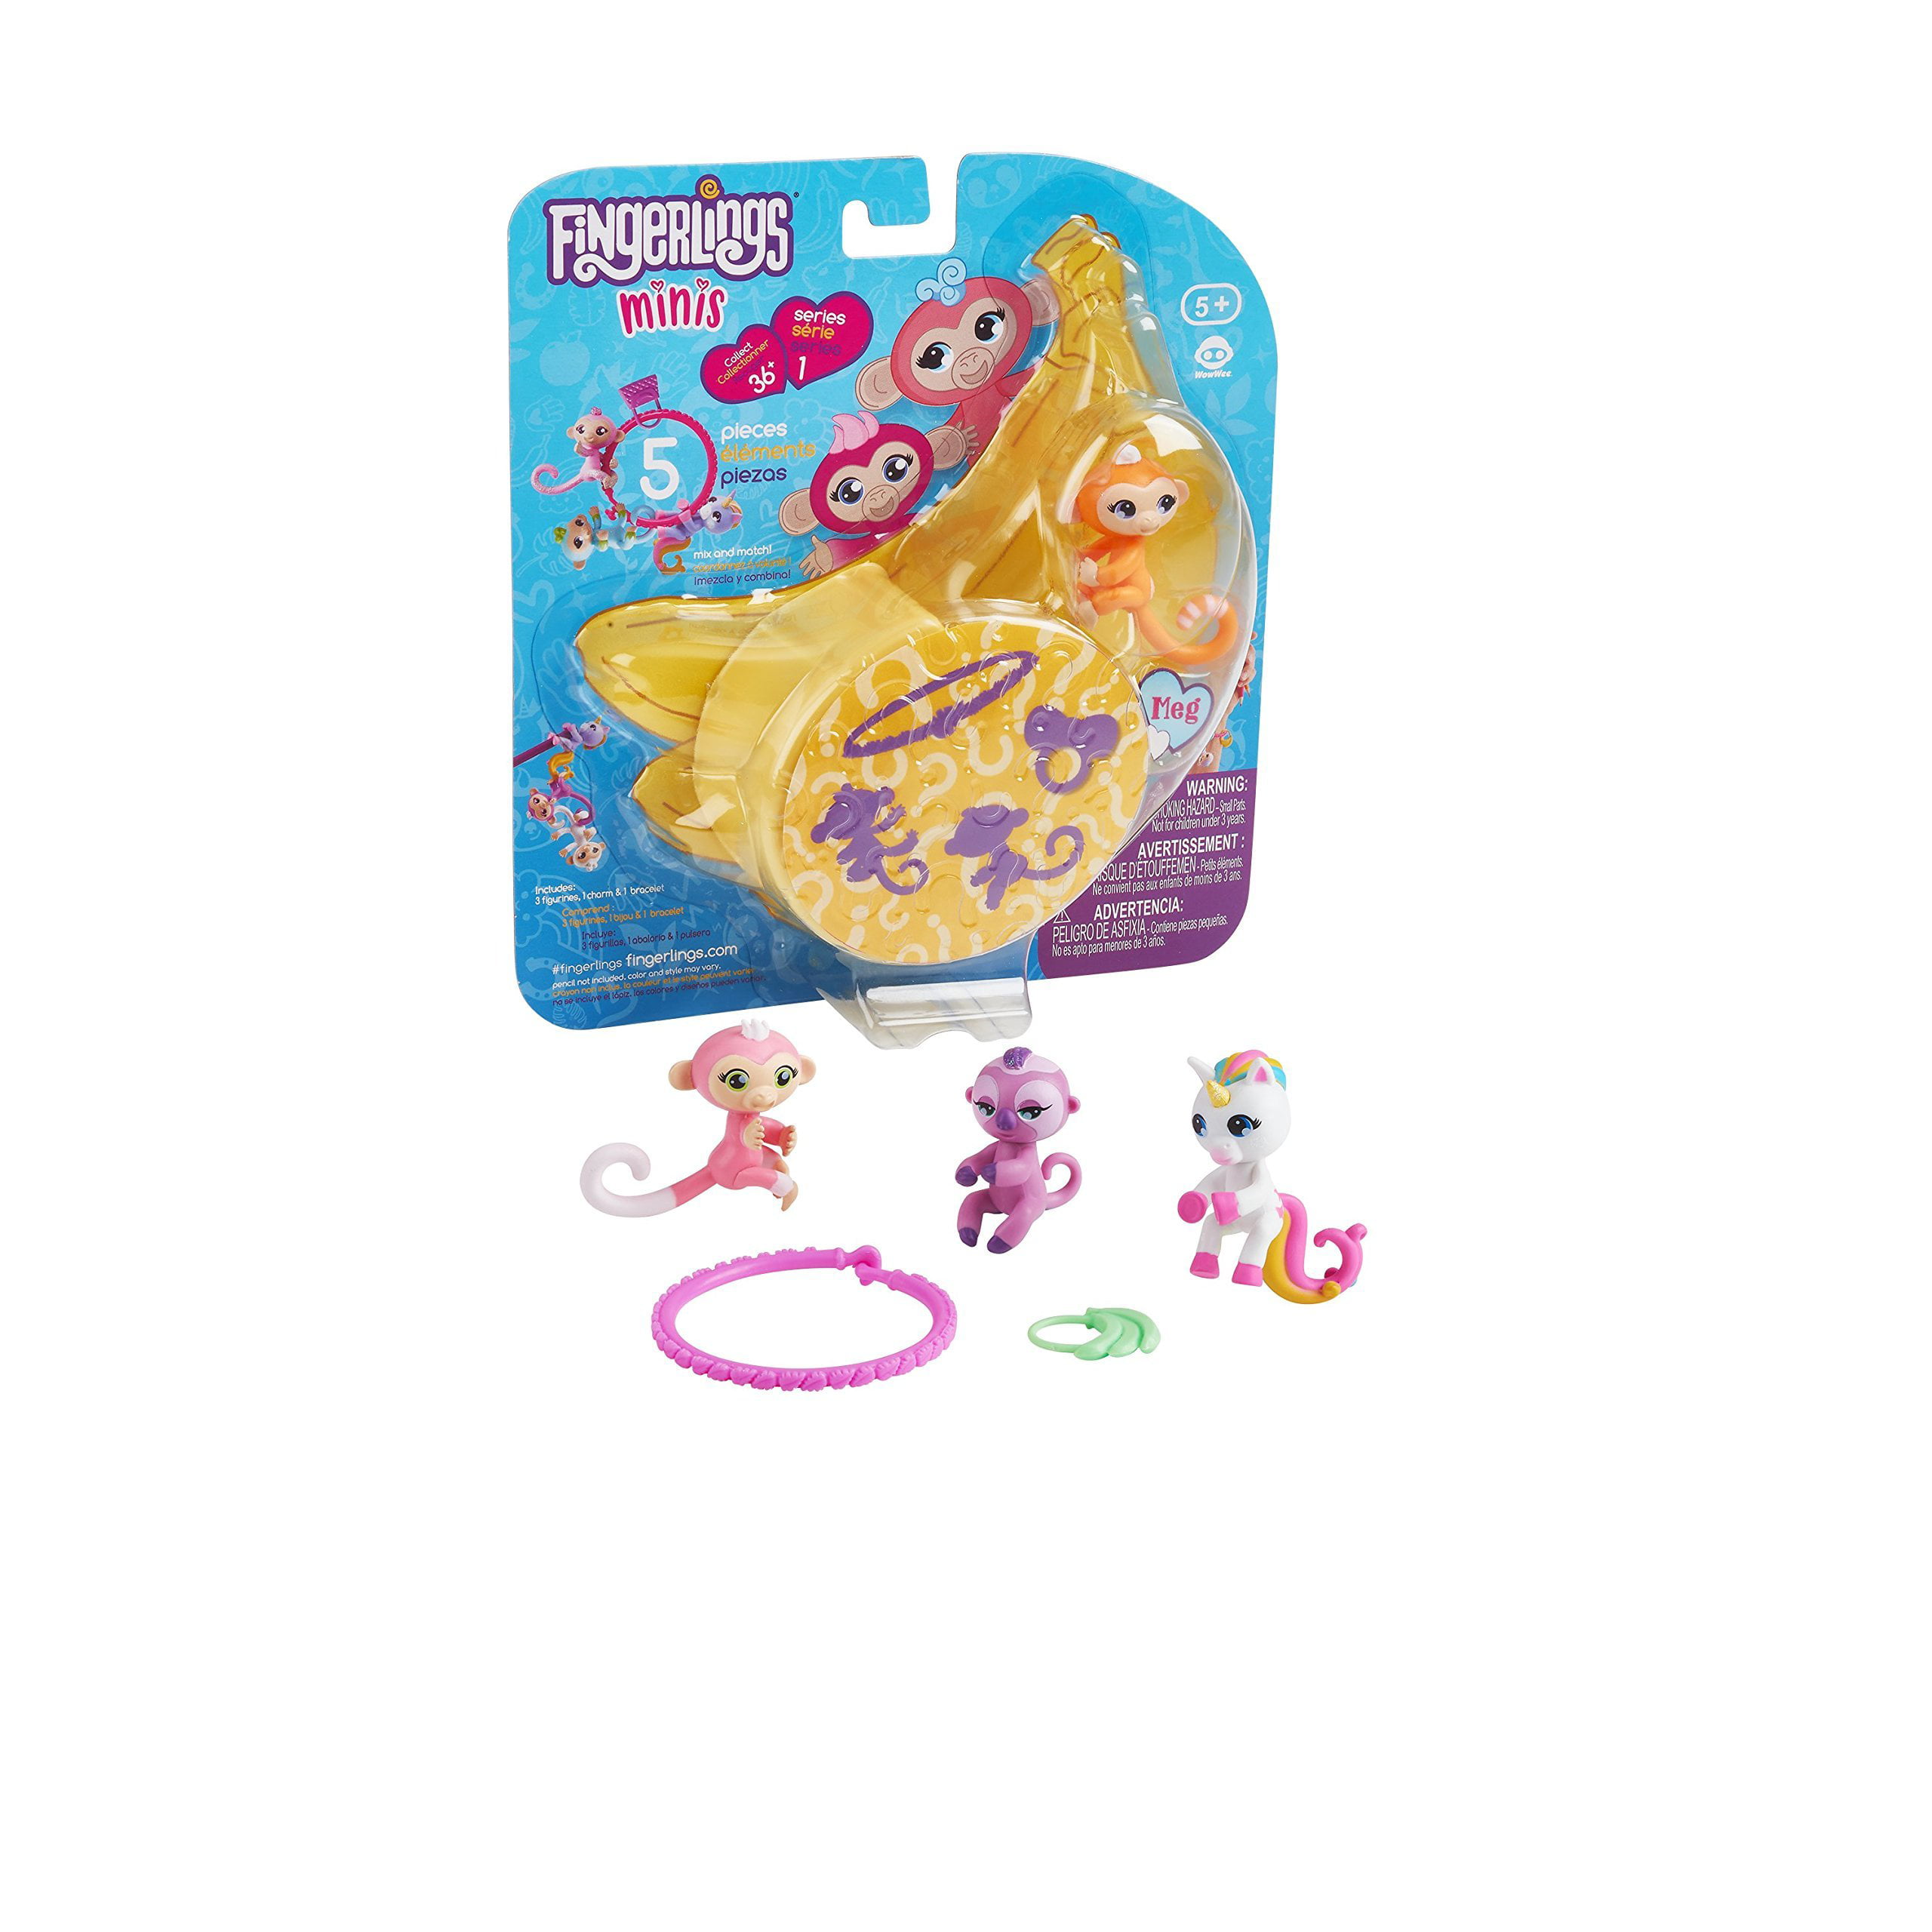 Fingerlings Mini Series 2 Figures Each Comes with Braclet & Charm Buyers Choice